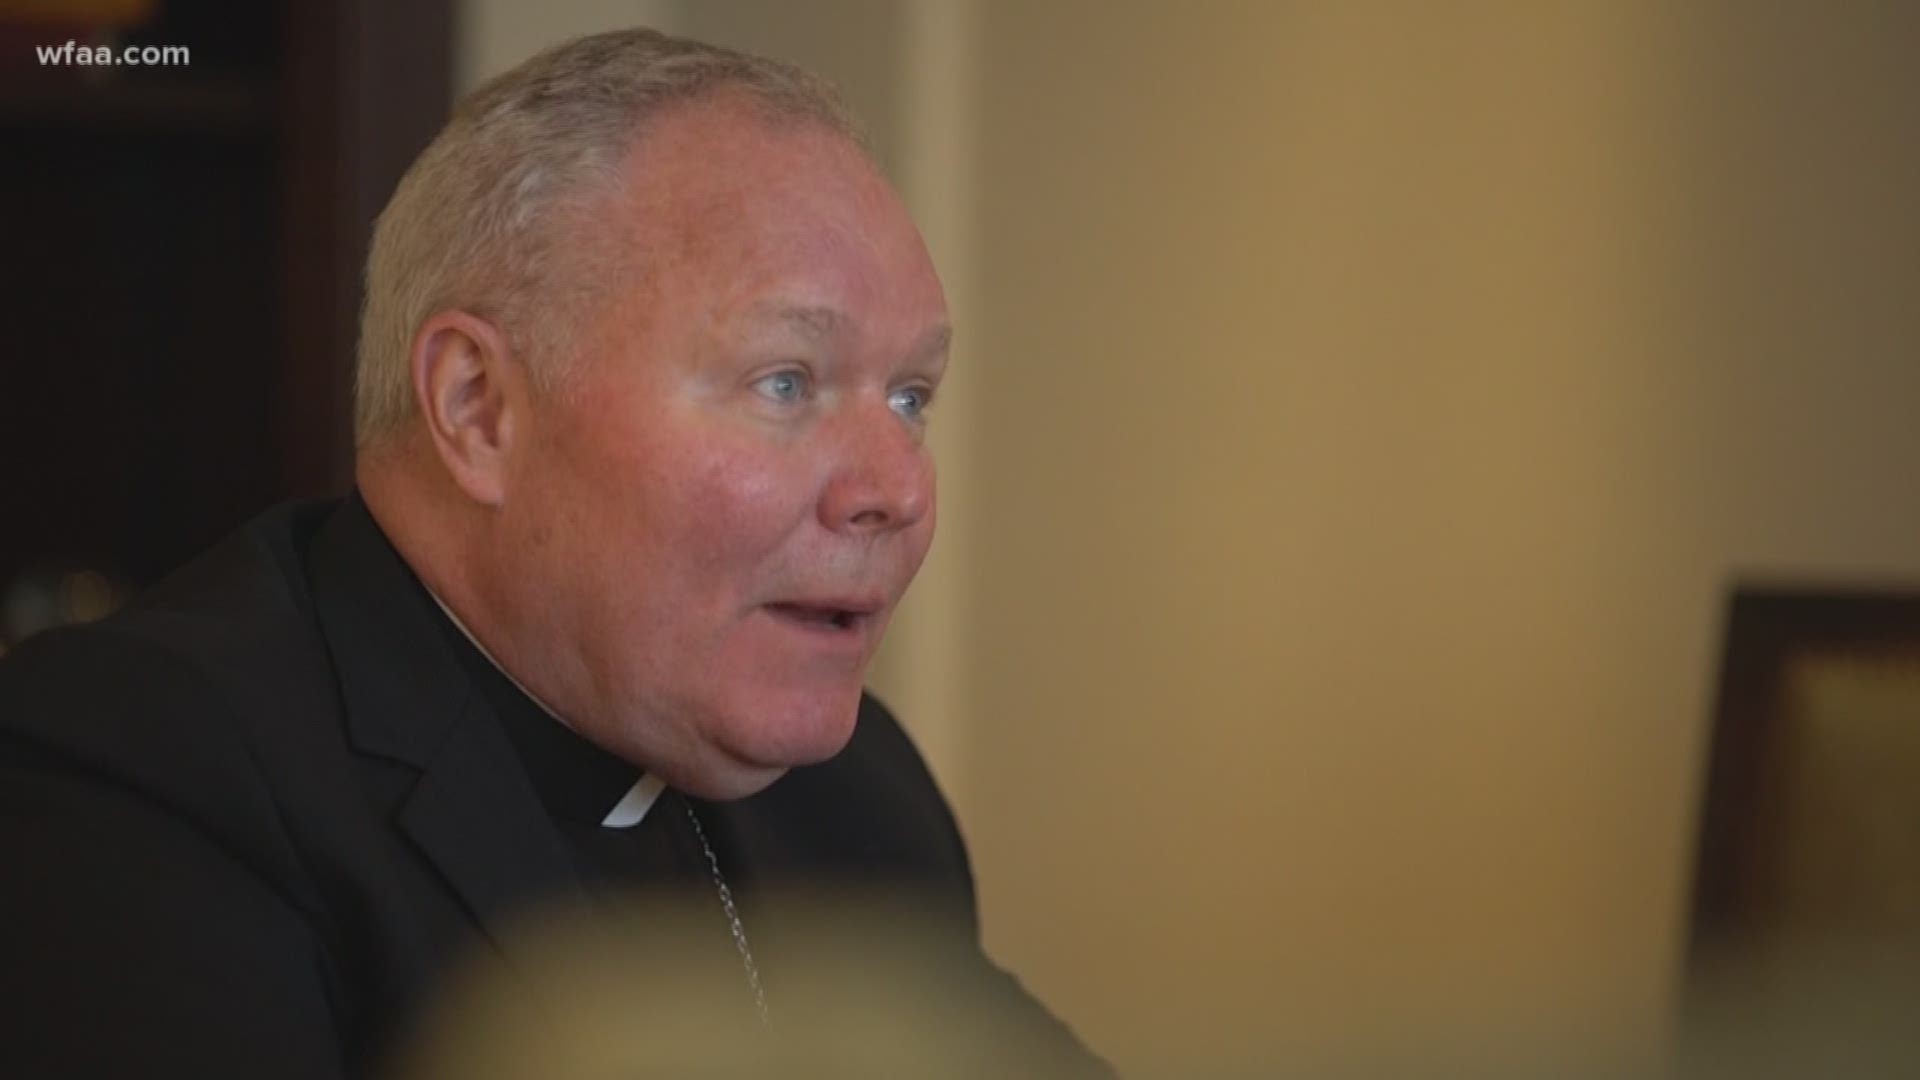 Pennsylvania Priest Sentenced To Months For Sexually Abusing Minors Sexiezpix Web Porn